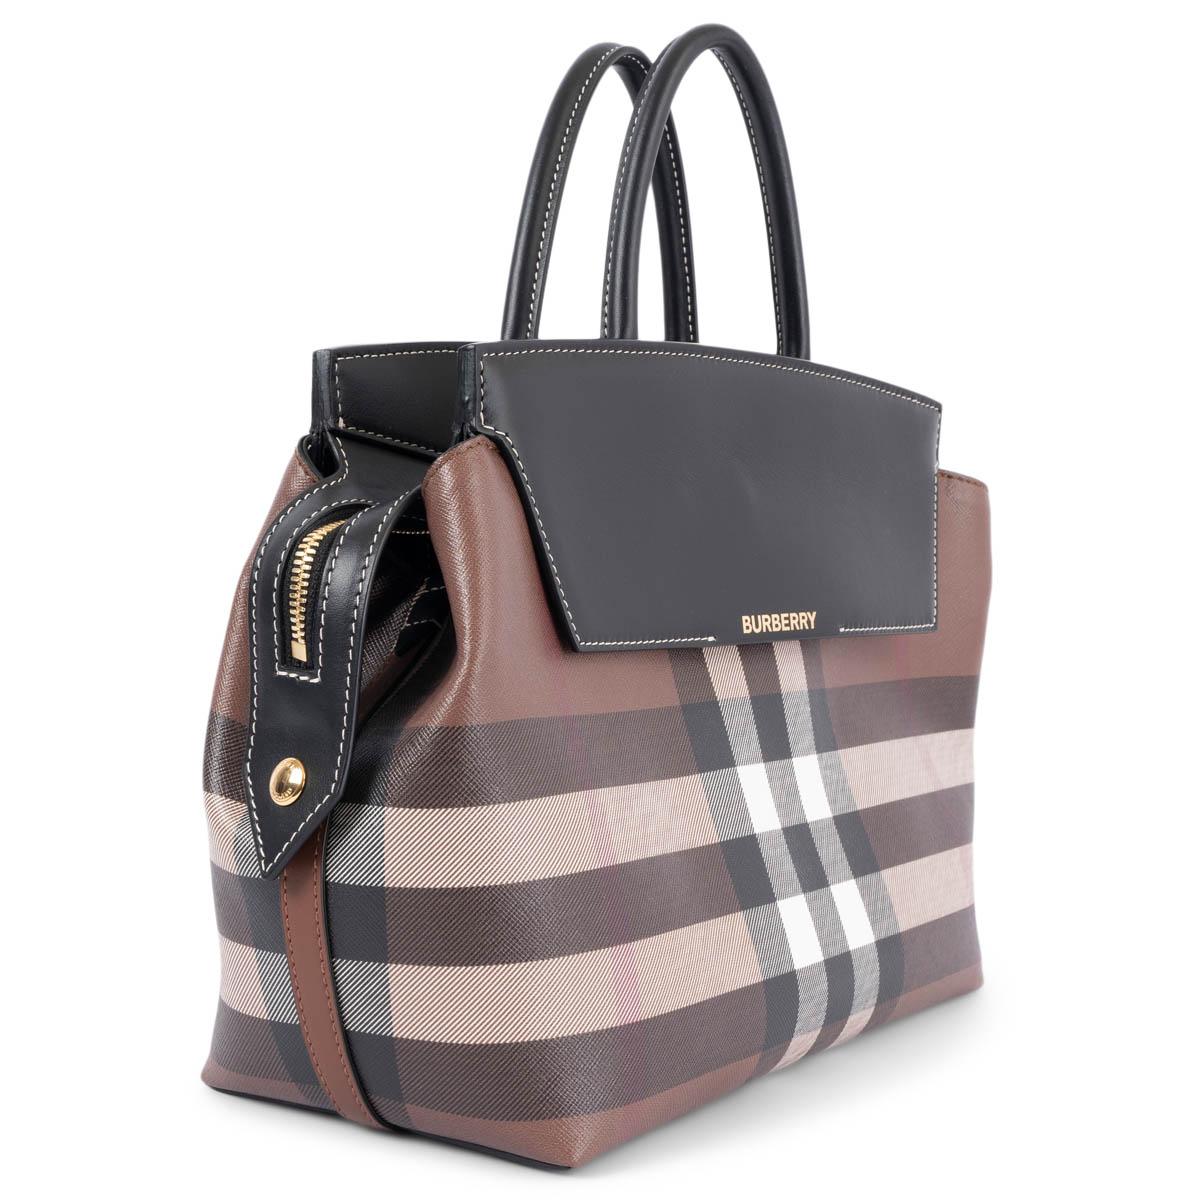 100% authentic Burberry Medium Catherine check & leather shoulder bag in brich brown, black, white and red coated canvas and black buffed leather trim featuring gold-tone hardware. Opens with a zipper on top and is lined in black canvas and leather